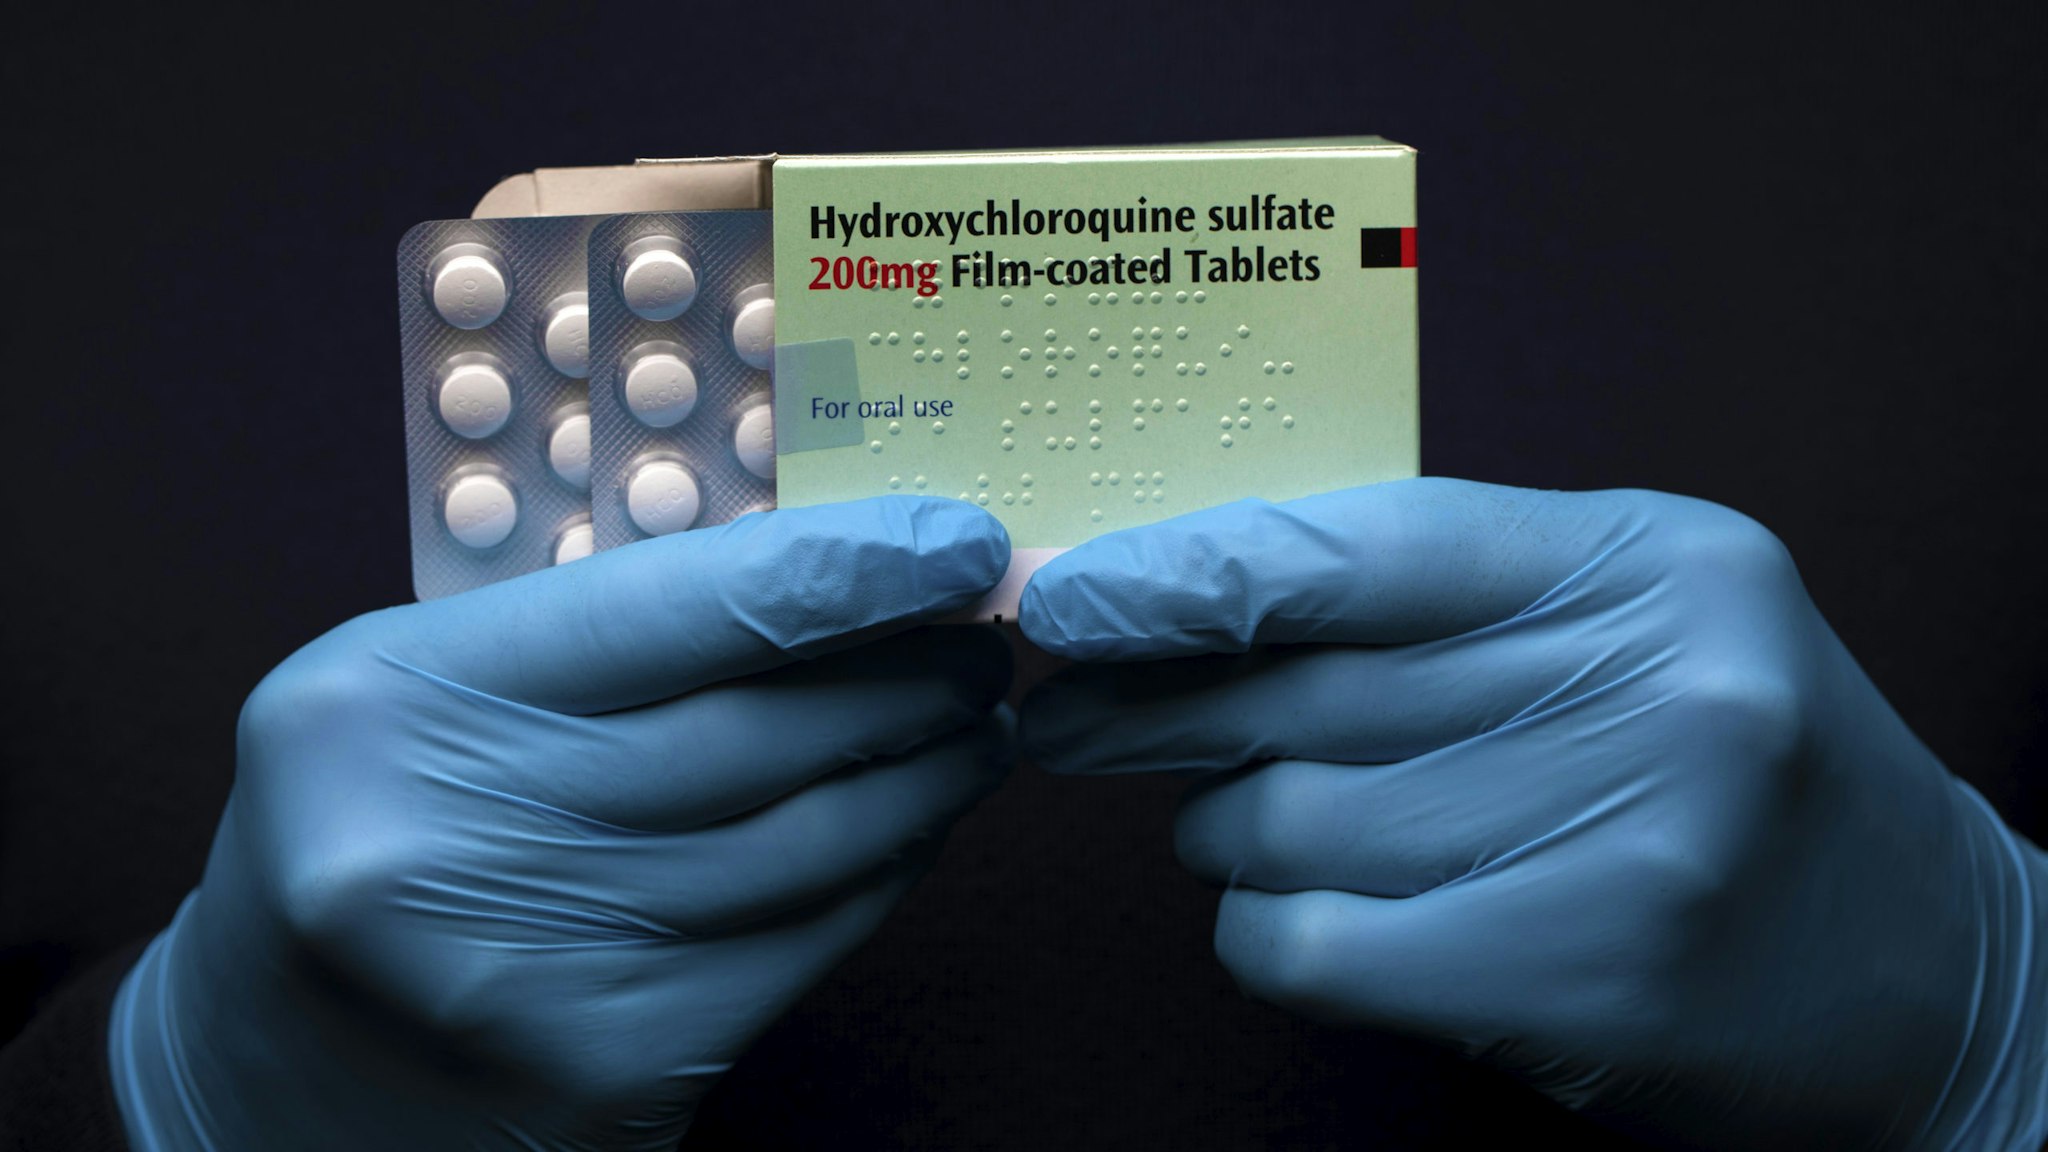 LONDON, UNITED KINGDOM - MARCH 26: In this photo illustration a pack of Hydroxychloroquine Sulfate medication is held up on March 26, 2020 in London, United Kingdom. The Coronavirus (COVID-19) pandemic has spread to many countries across the world, claiming over 20,000 lives and infecting hundreds of thousands more. U.S. President Donald Trump recently promoted Hydroxychloroquine, a common anti-malaria drug, as a potential treatment for COVID-19 when combined with the antibiotic azithromycin. “HYDROXYCHLOROQUINE &amp; AZITHROMYCIN, taken together, have a real chance to be one of the biggest game changers in the history of medicine,” President Trump tweeted last week.